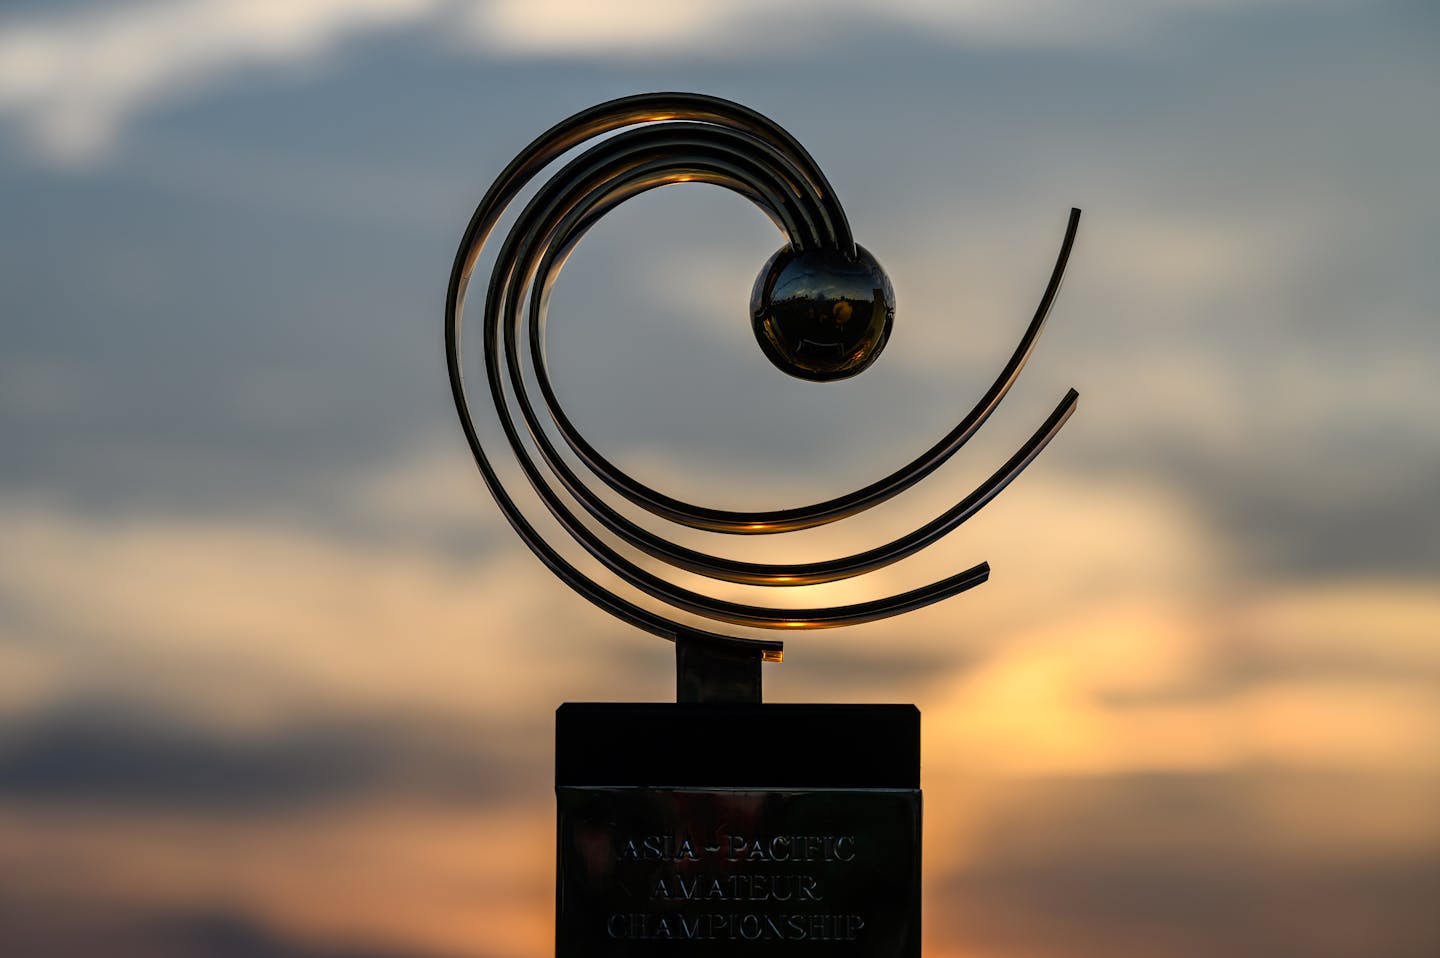 AAC Trophy at Sunset